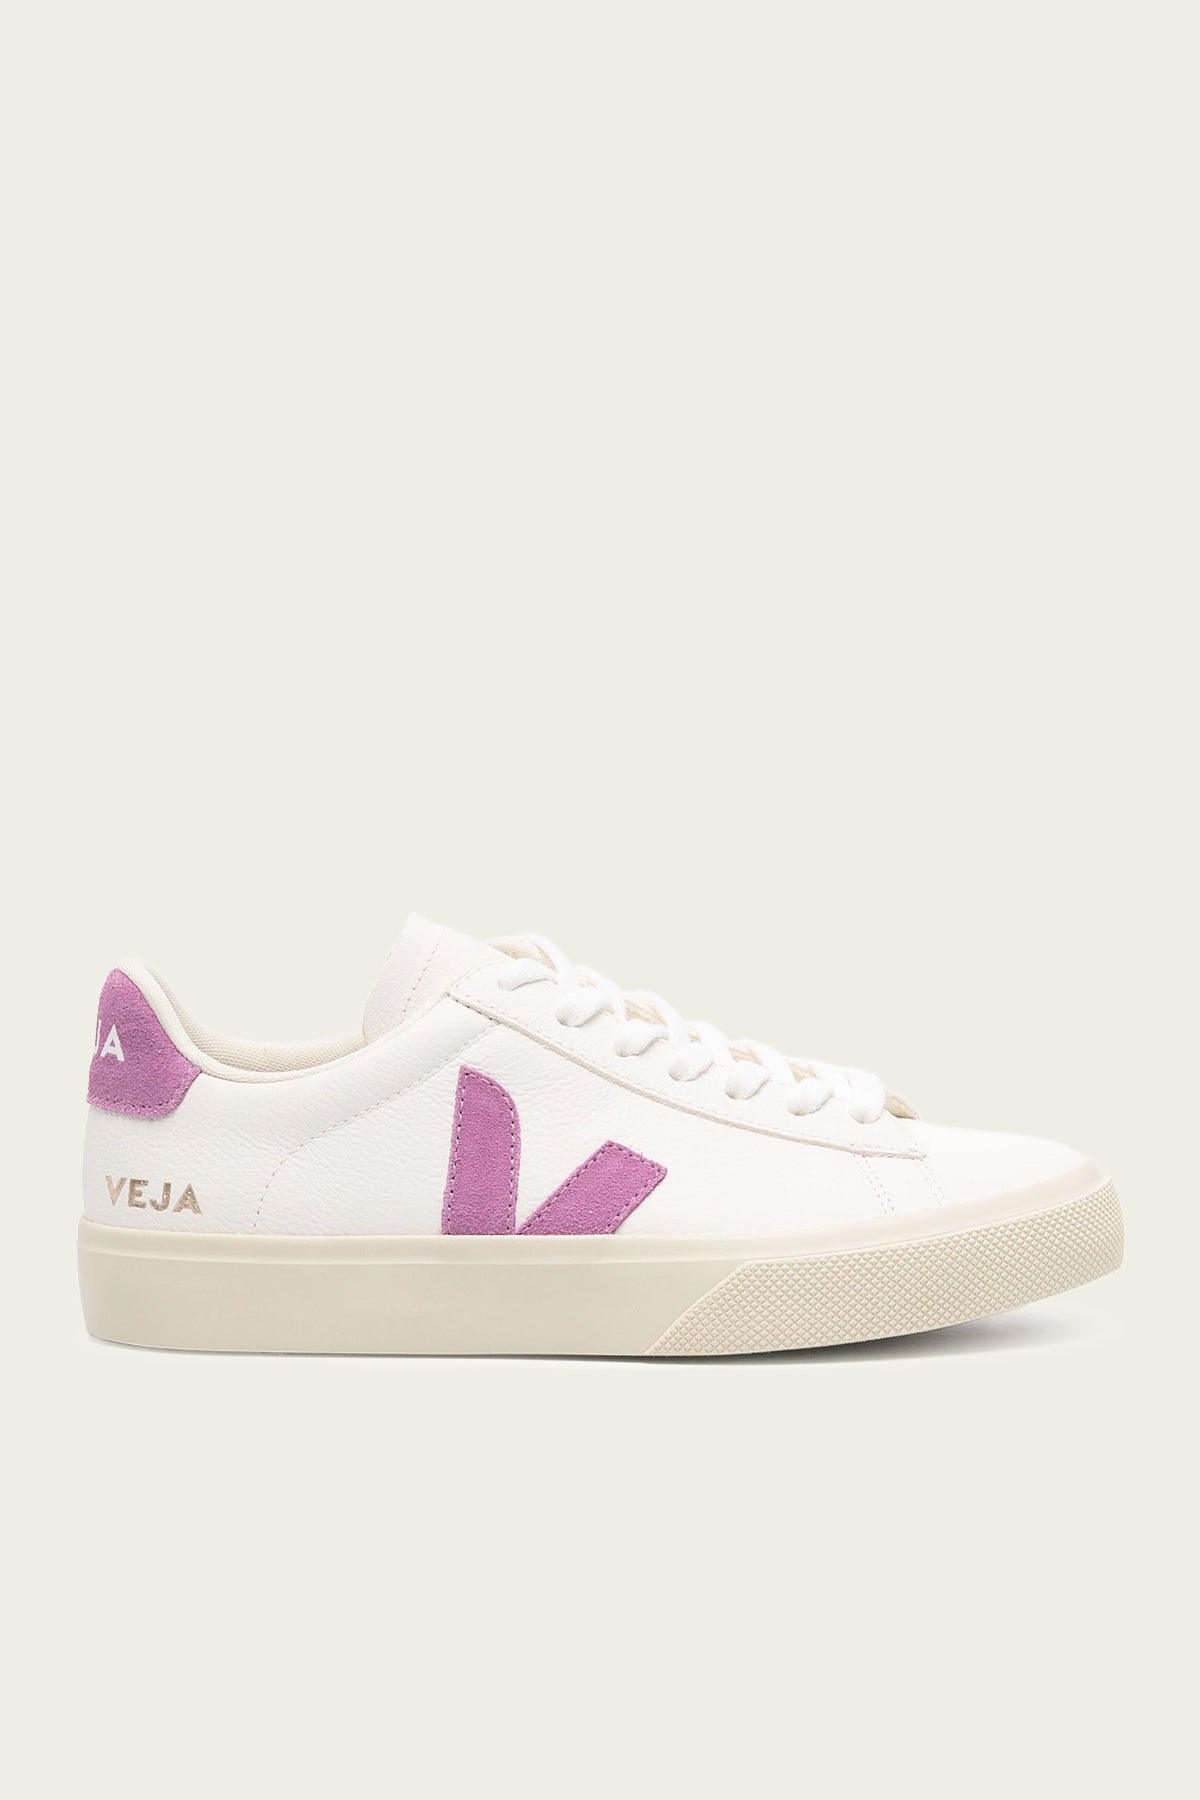 Campo Chromefree Leather Sneaker in White Mulberry - shop-olivia.com